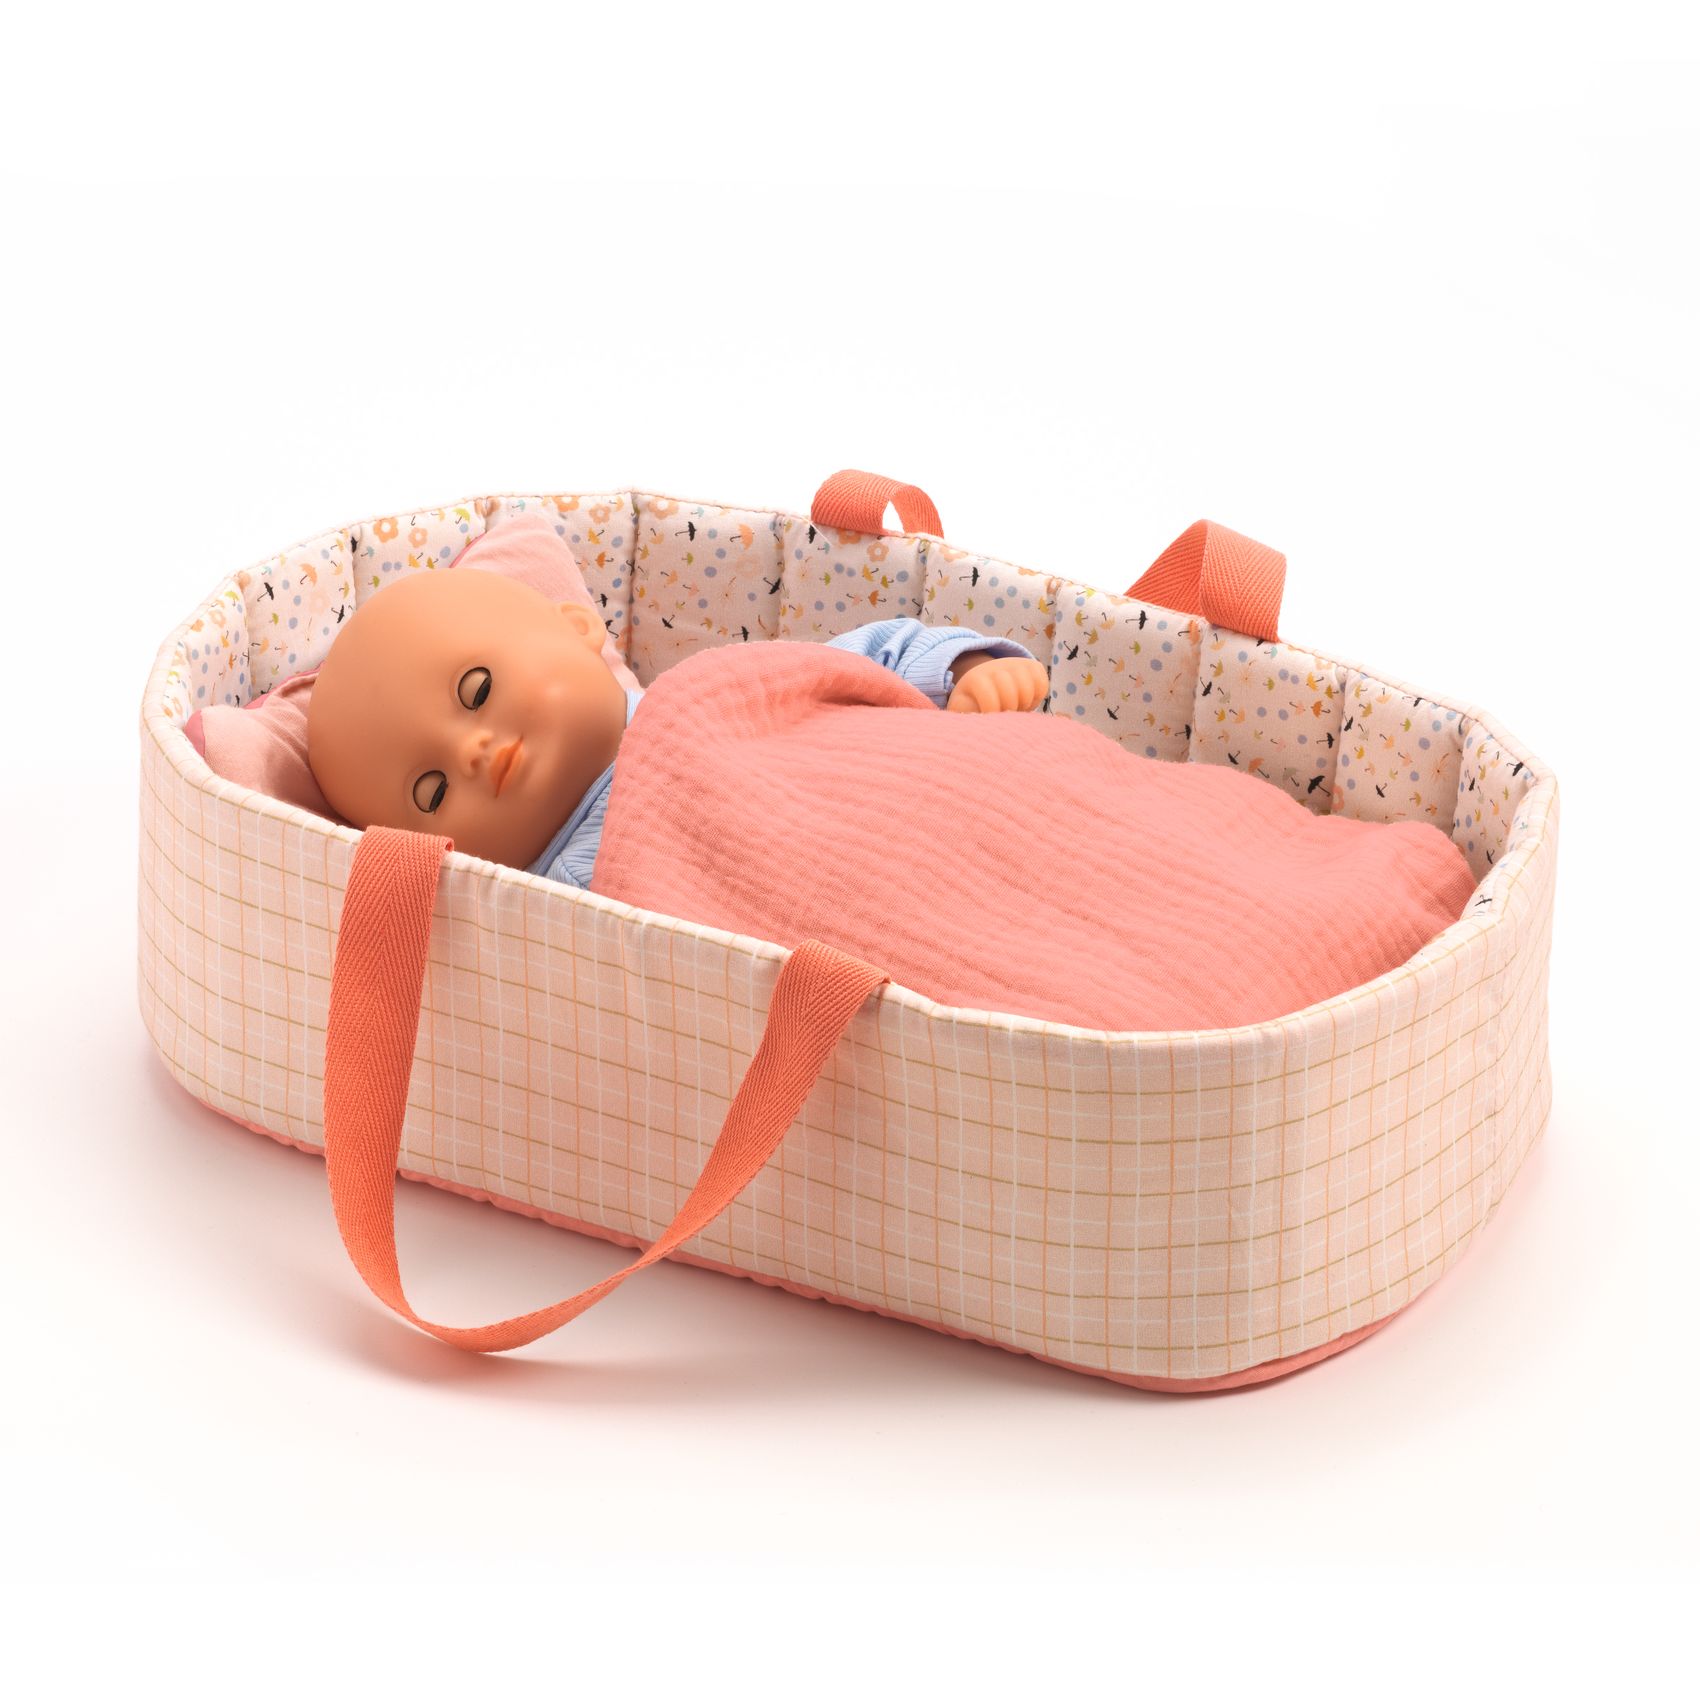 Dolls Bassinet by Djeco - Pink Lines